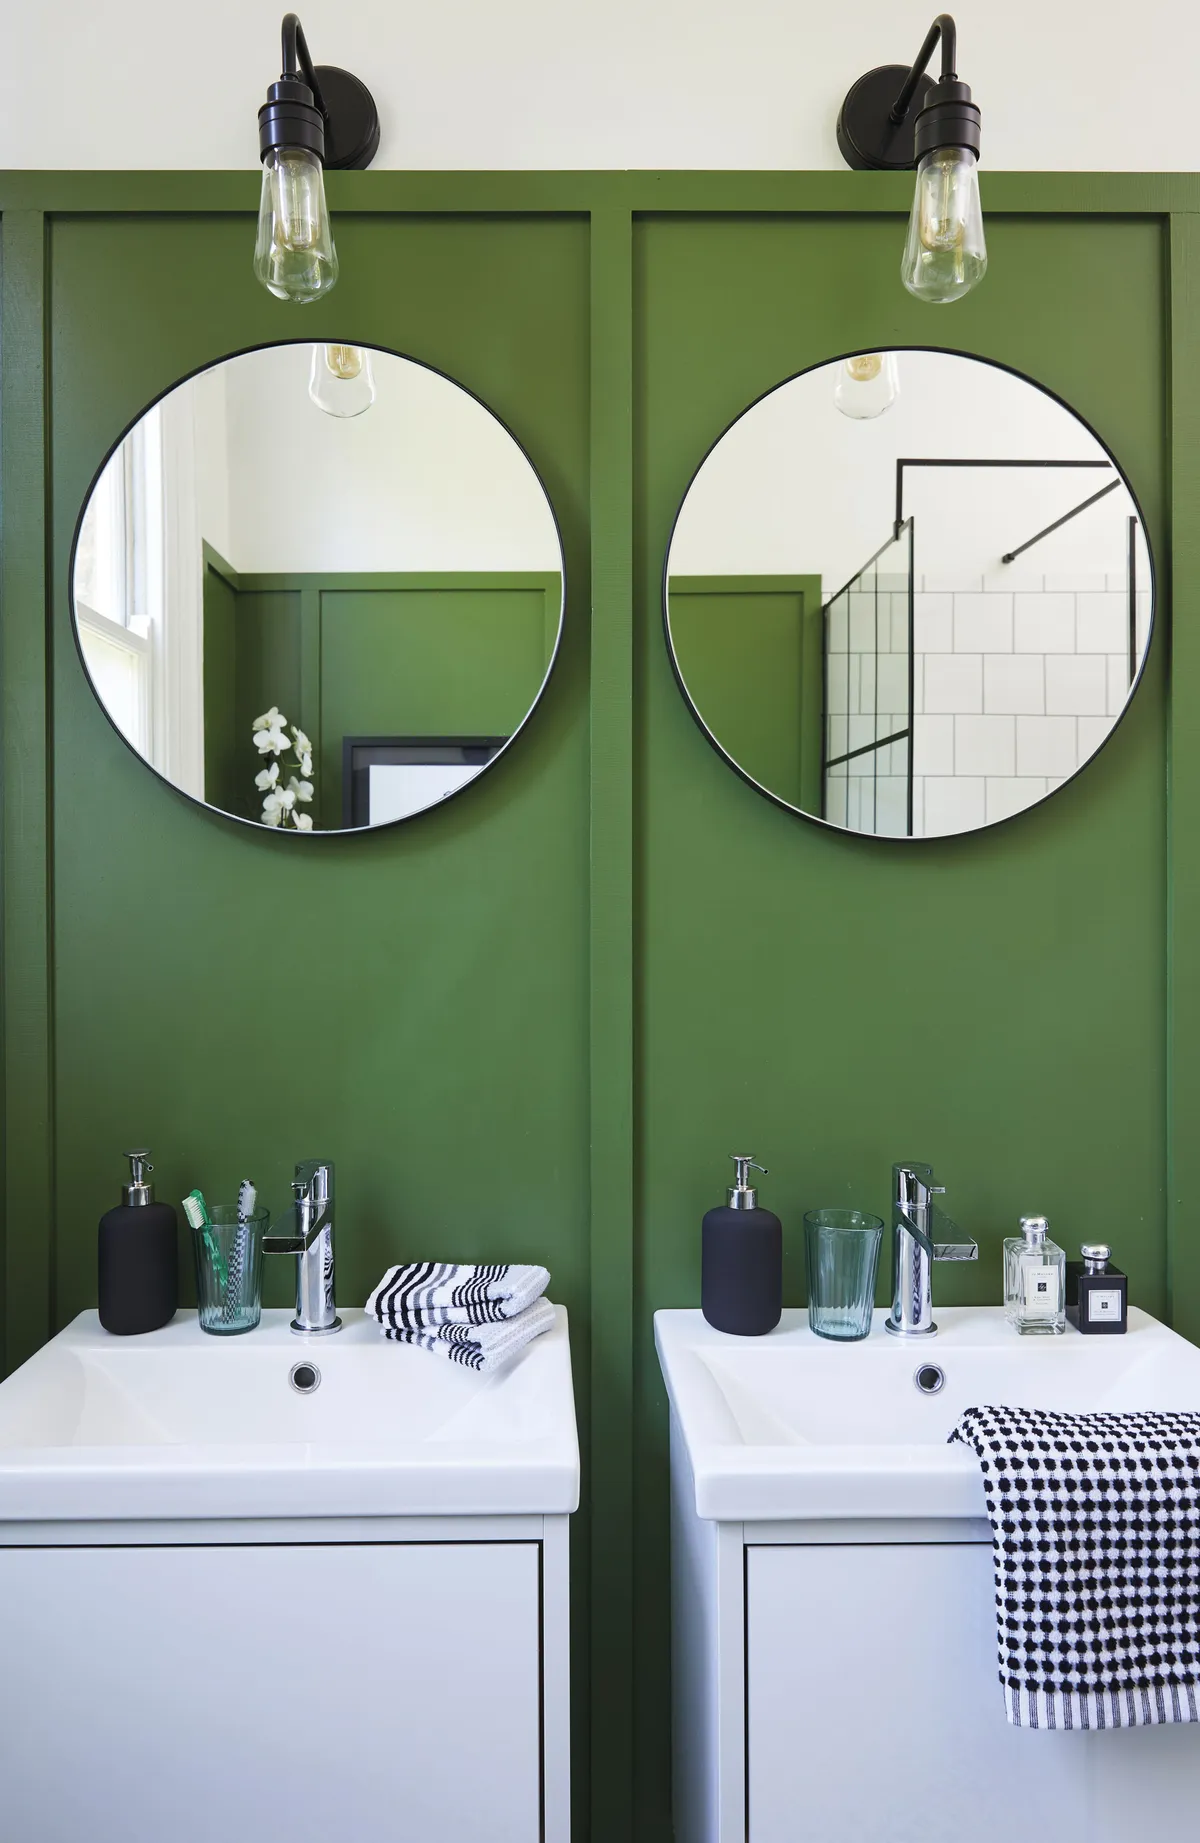 Good idea! Double sinks often prove a real bonus in busy bathrooms, while wall-hung units can visually enlarge a room by opening up the floor area.